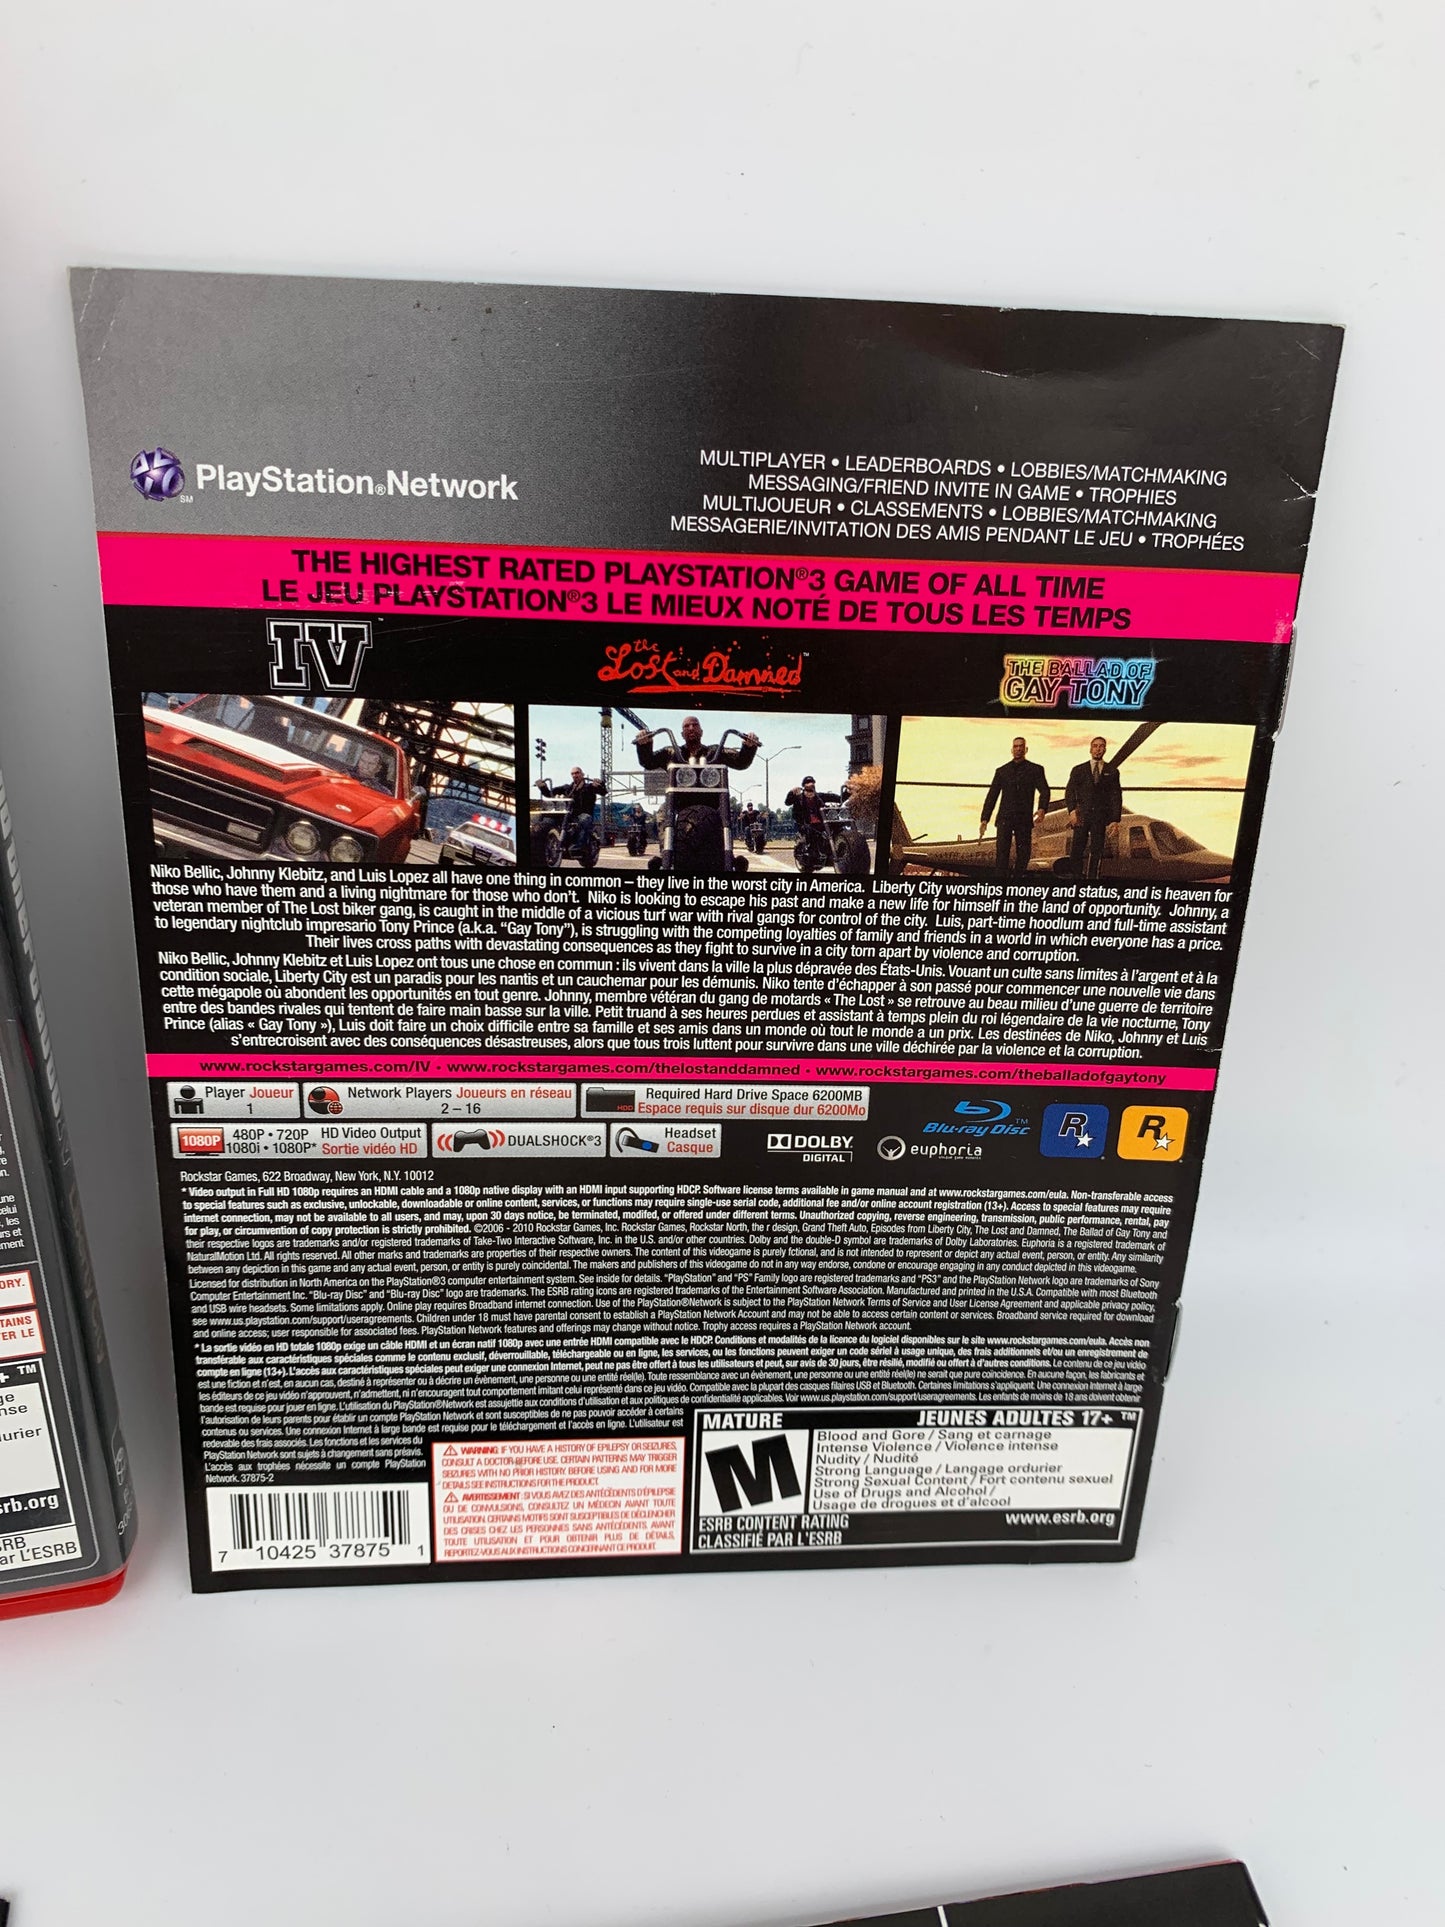 SONY PLAYSTATiON 3 [PS3] | GRAND THEFT AUTO IV &amp; EPiSODE FROM LIBERTY CiTY THE COMPLETE EDiTiON | GREATEST HiTS